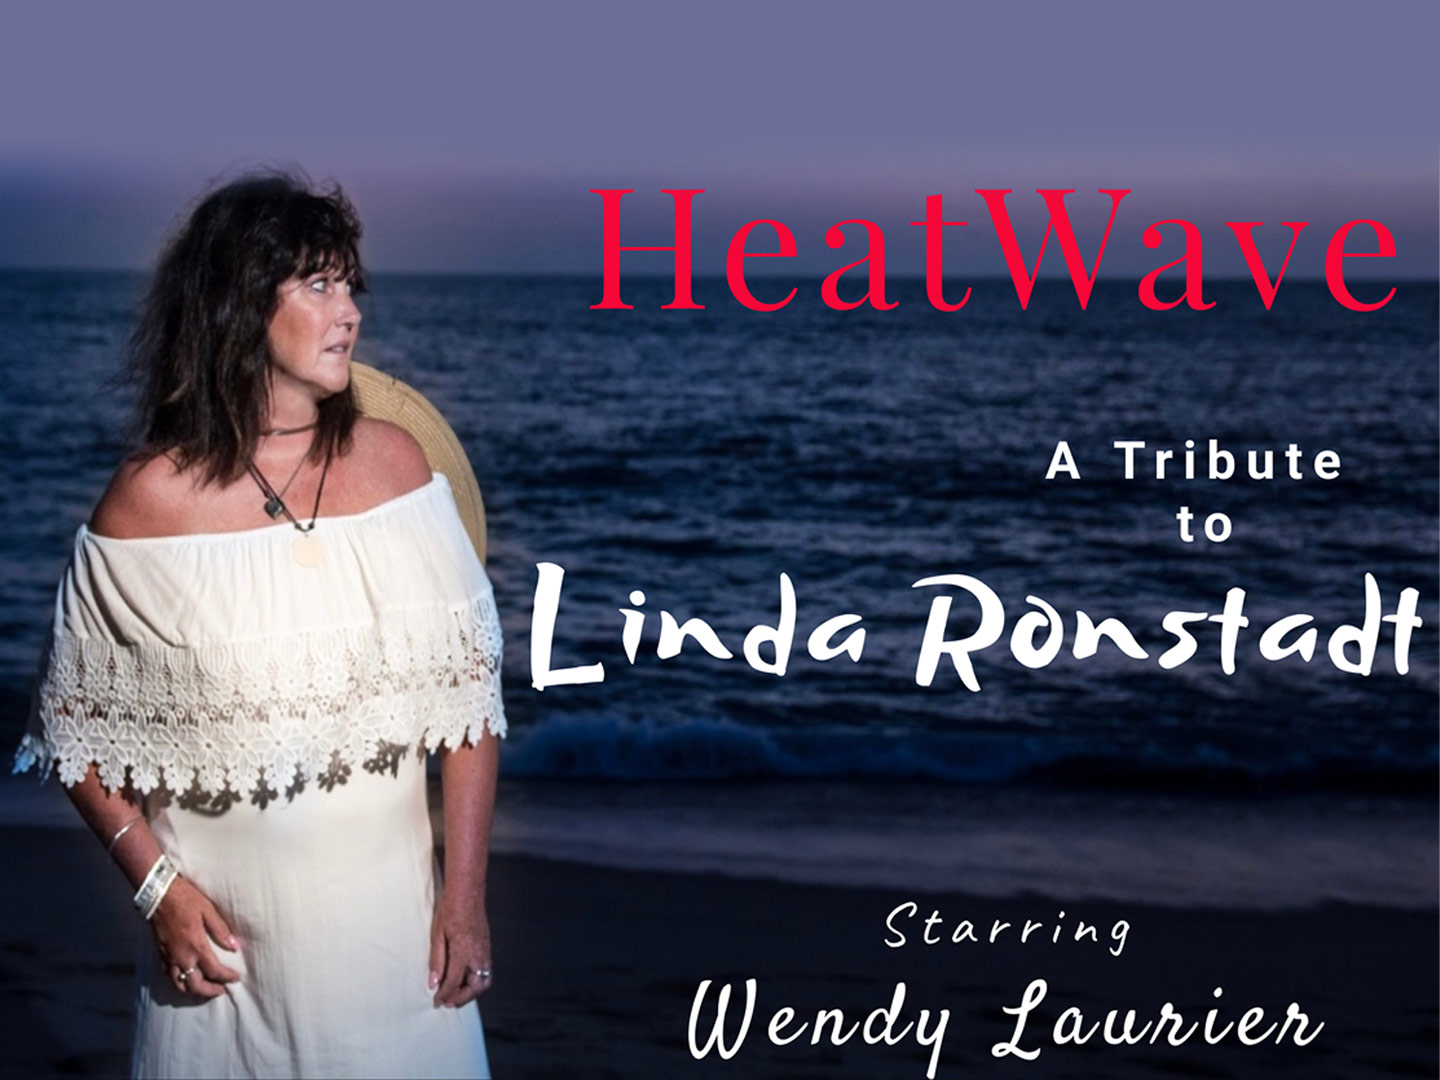 HEAT WAVE - A TRIBUTE TO LINDA RONSTADT starring Wendy Laurier